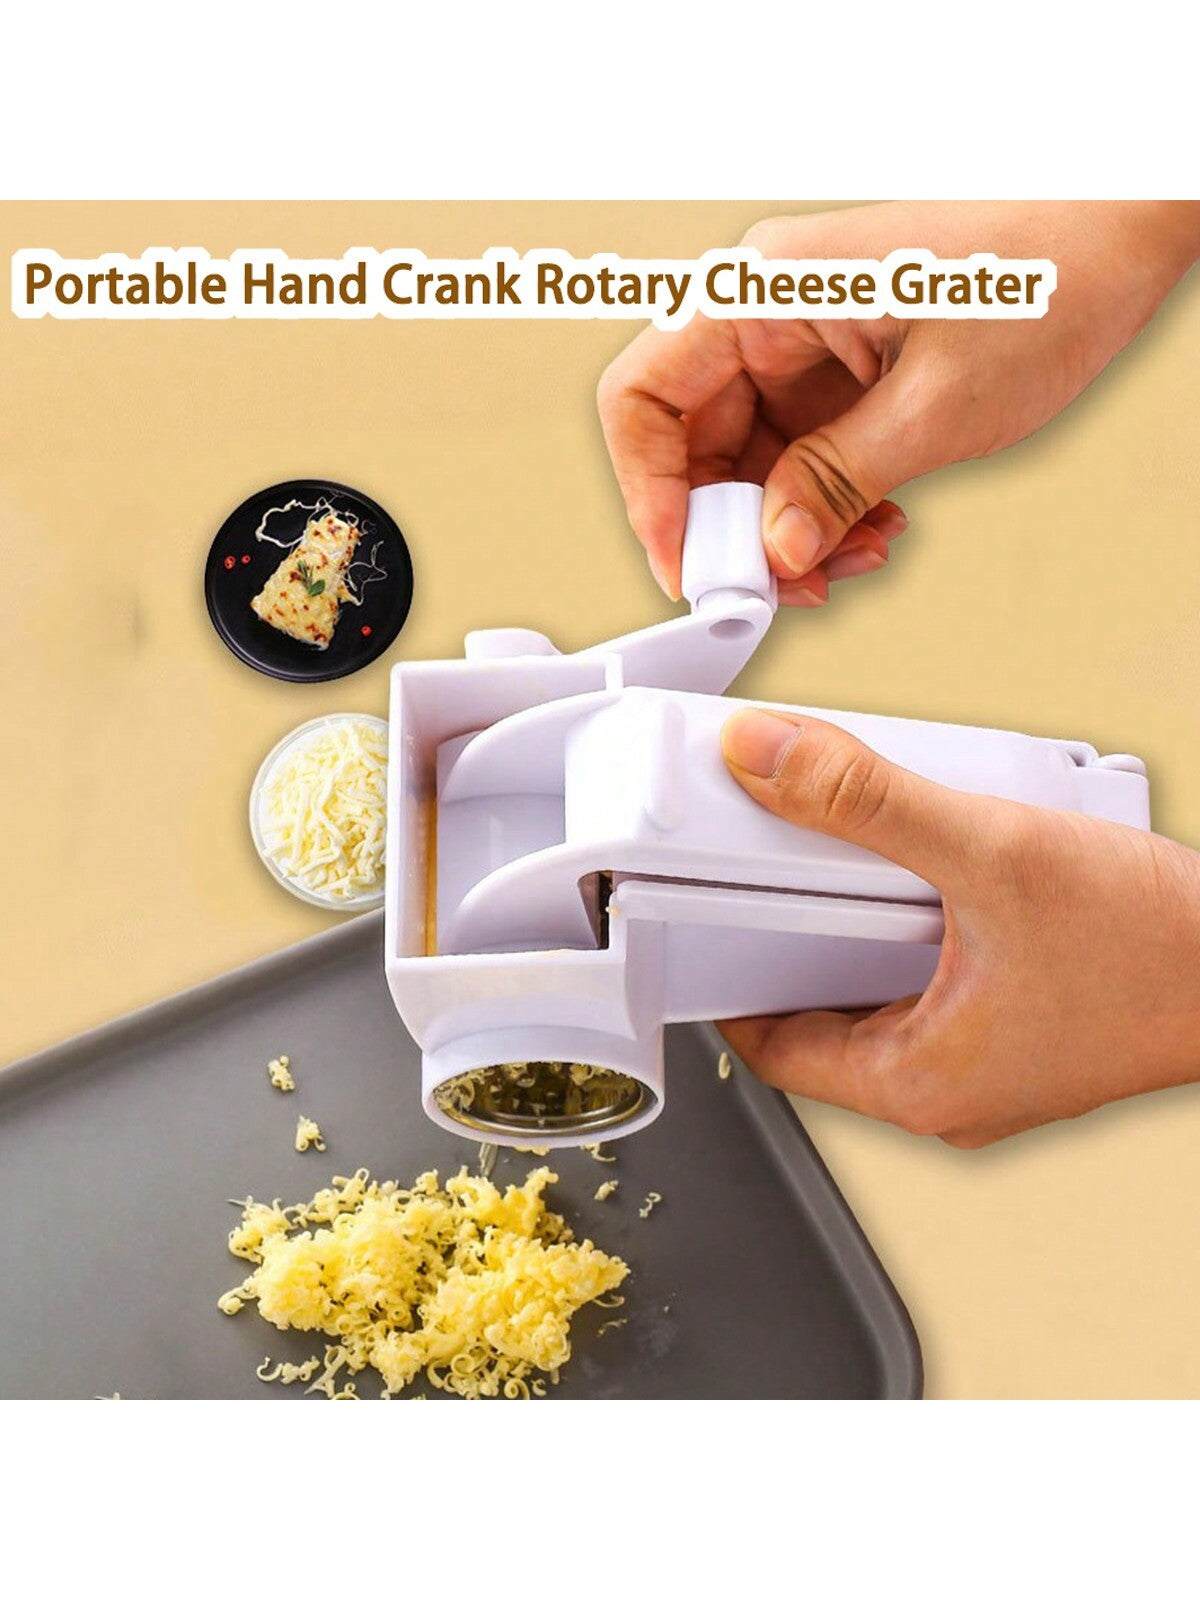 Rotary Cheese Grater Manual Handheld Cheese Grater with Stainless Steel Drum for Grating Hard Cheese Chocolate Nuts Kitchen Tool (White)